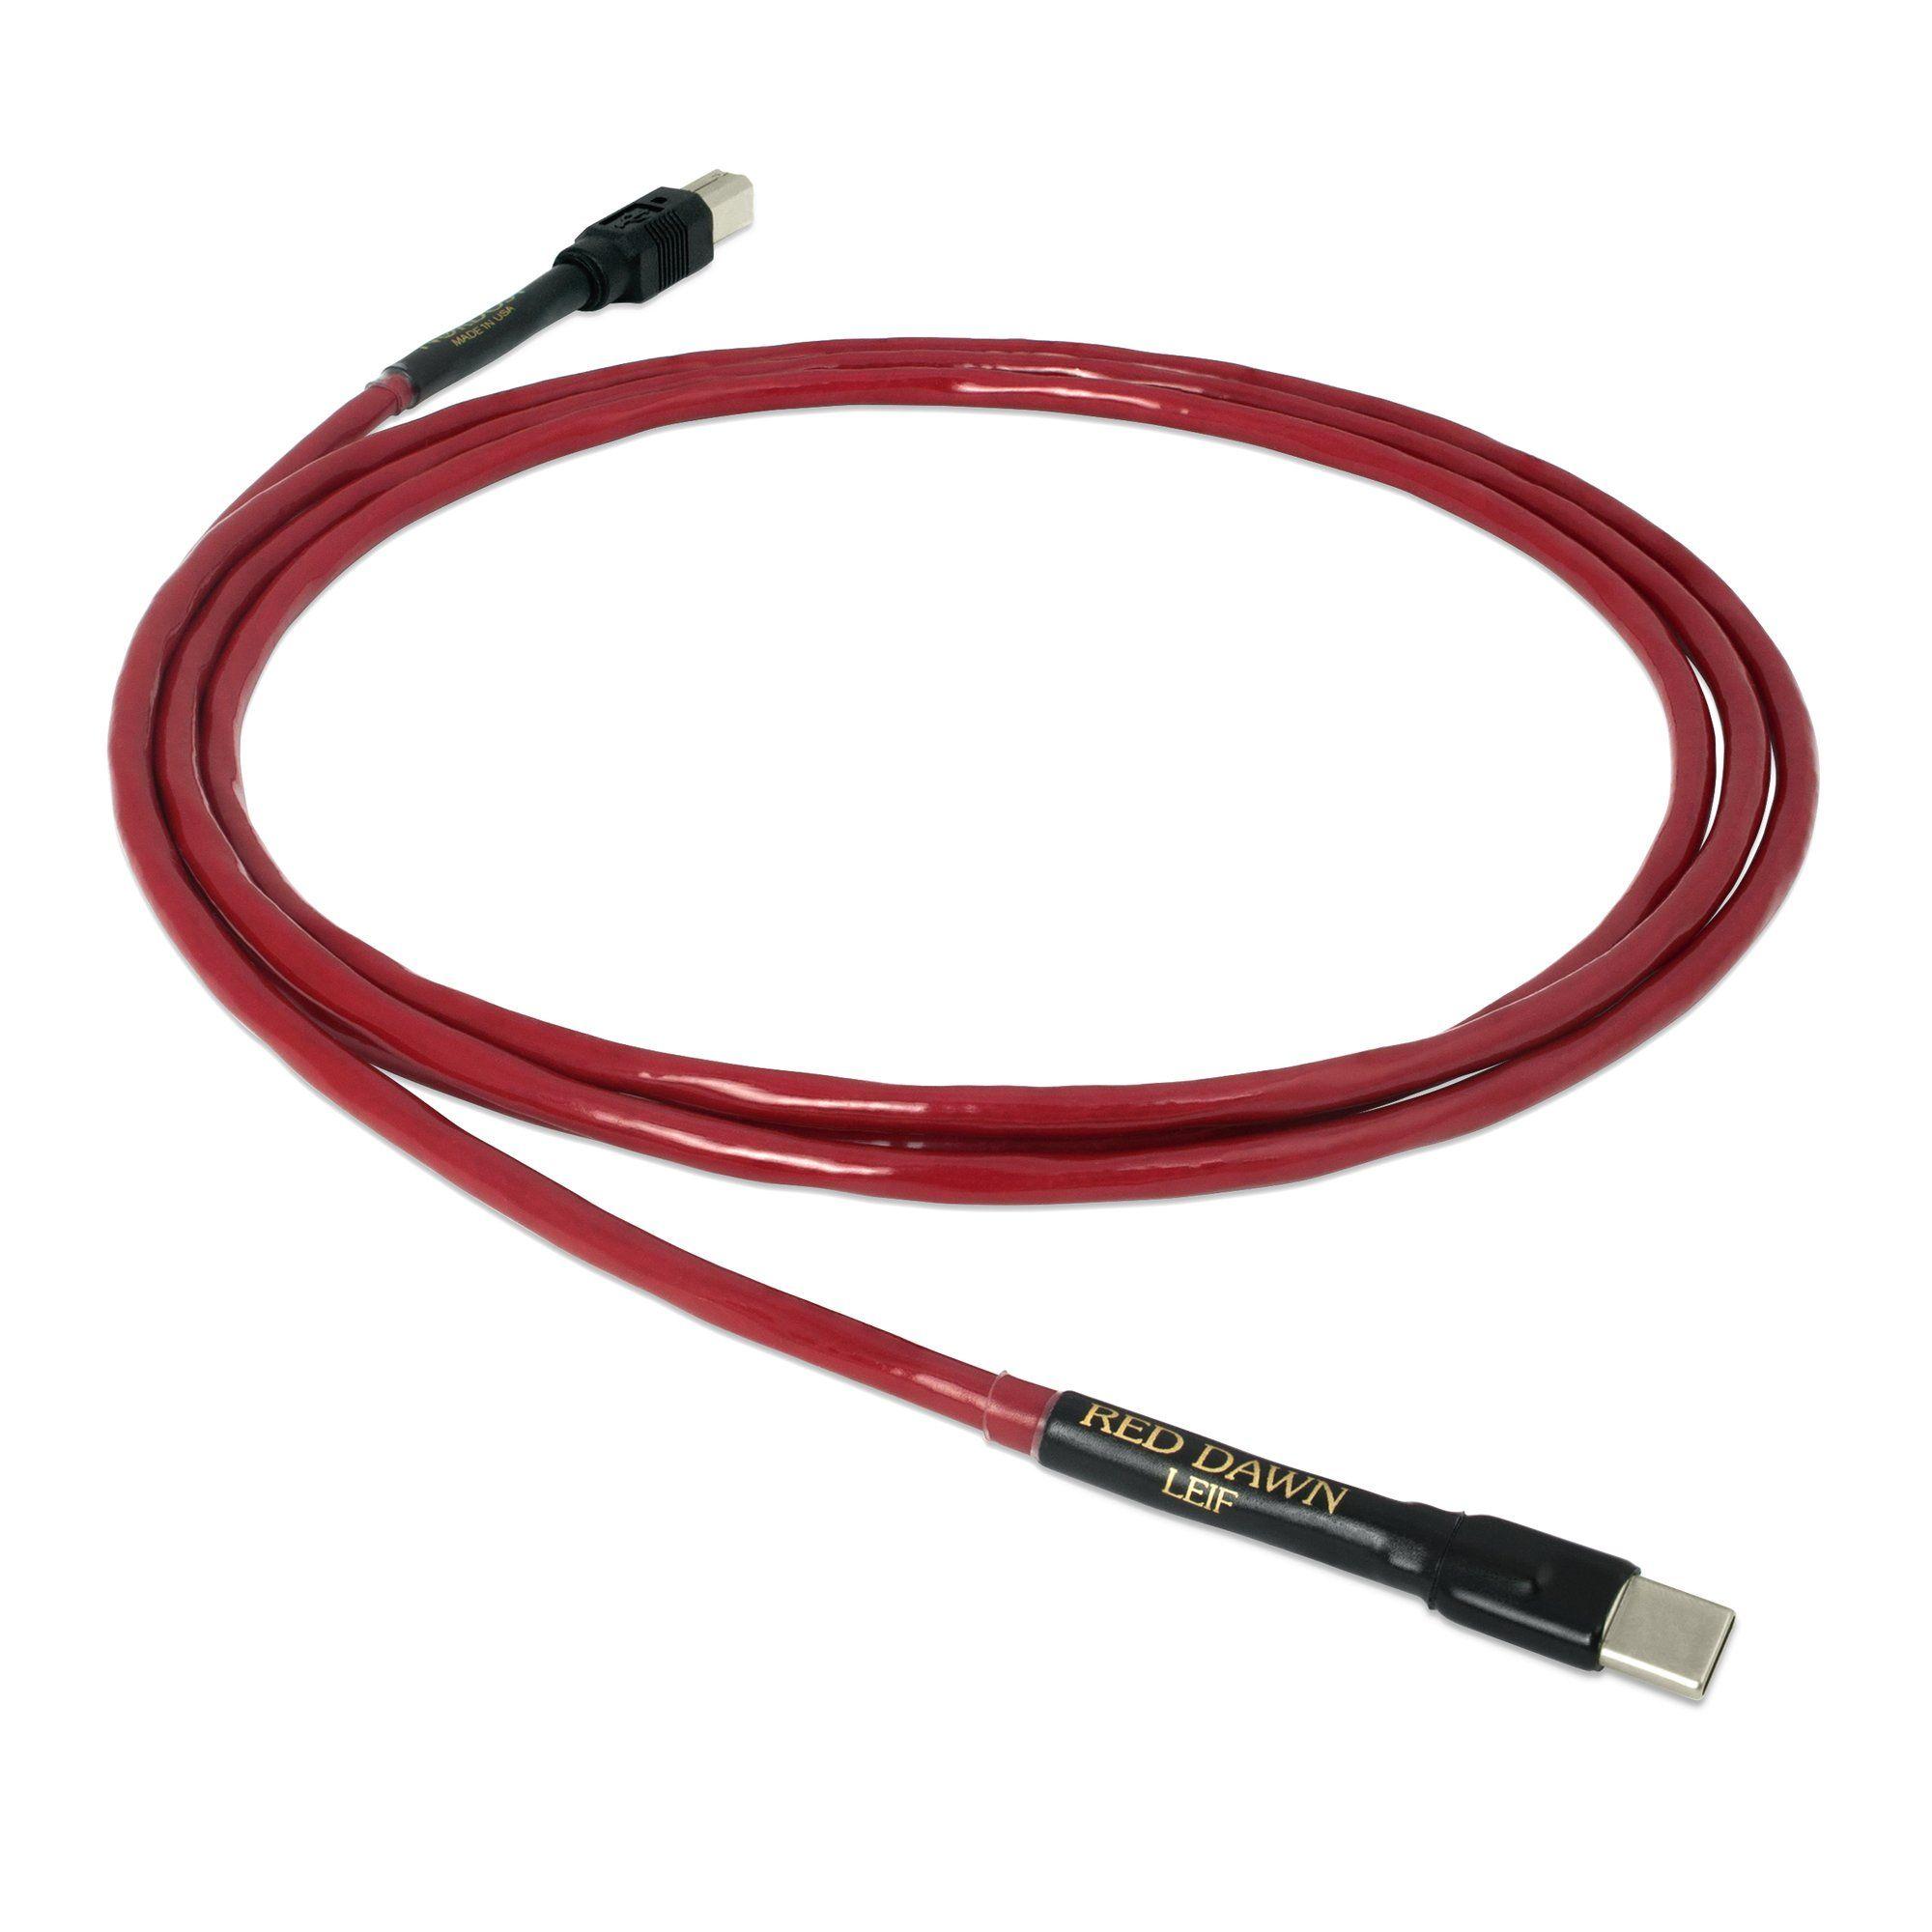 Red Dawn Products Logo - Nordost Red Dawn USB Type C Cable At Sight Sound Gallery. An